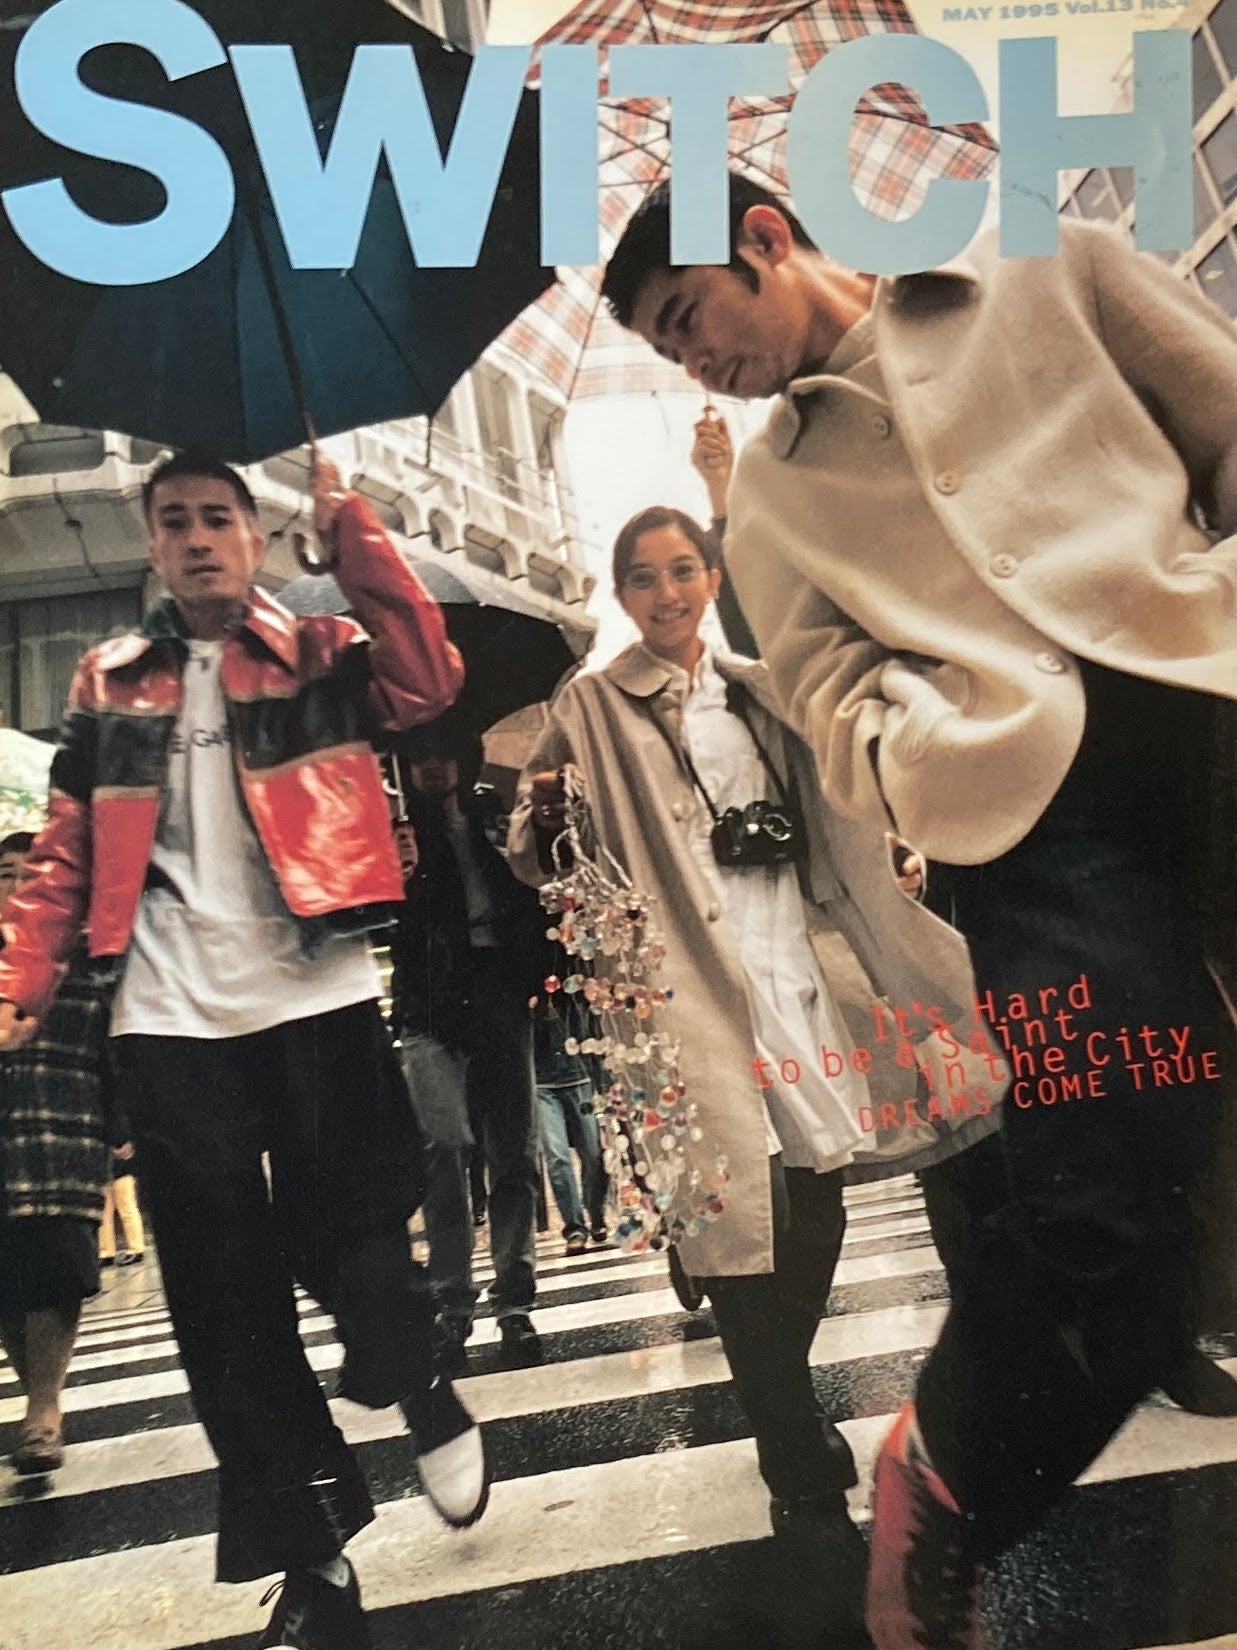 SWITCH　Vol.13　No.4　1995 MAY　ベティ・ブープの唇